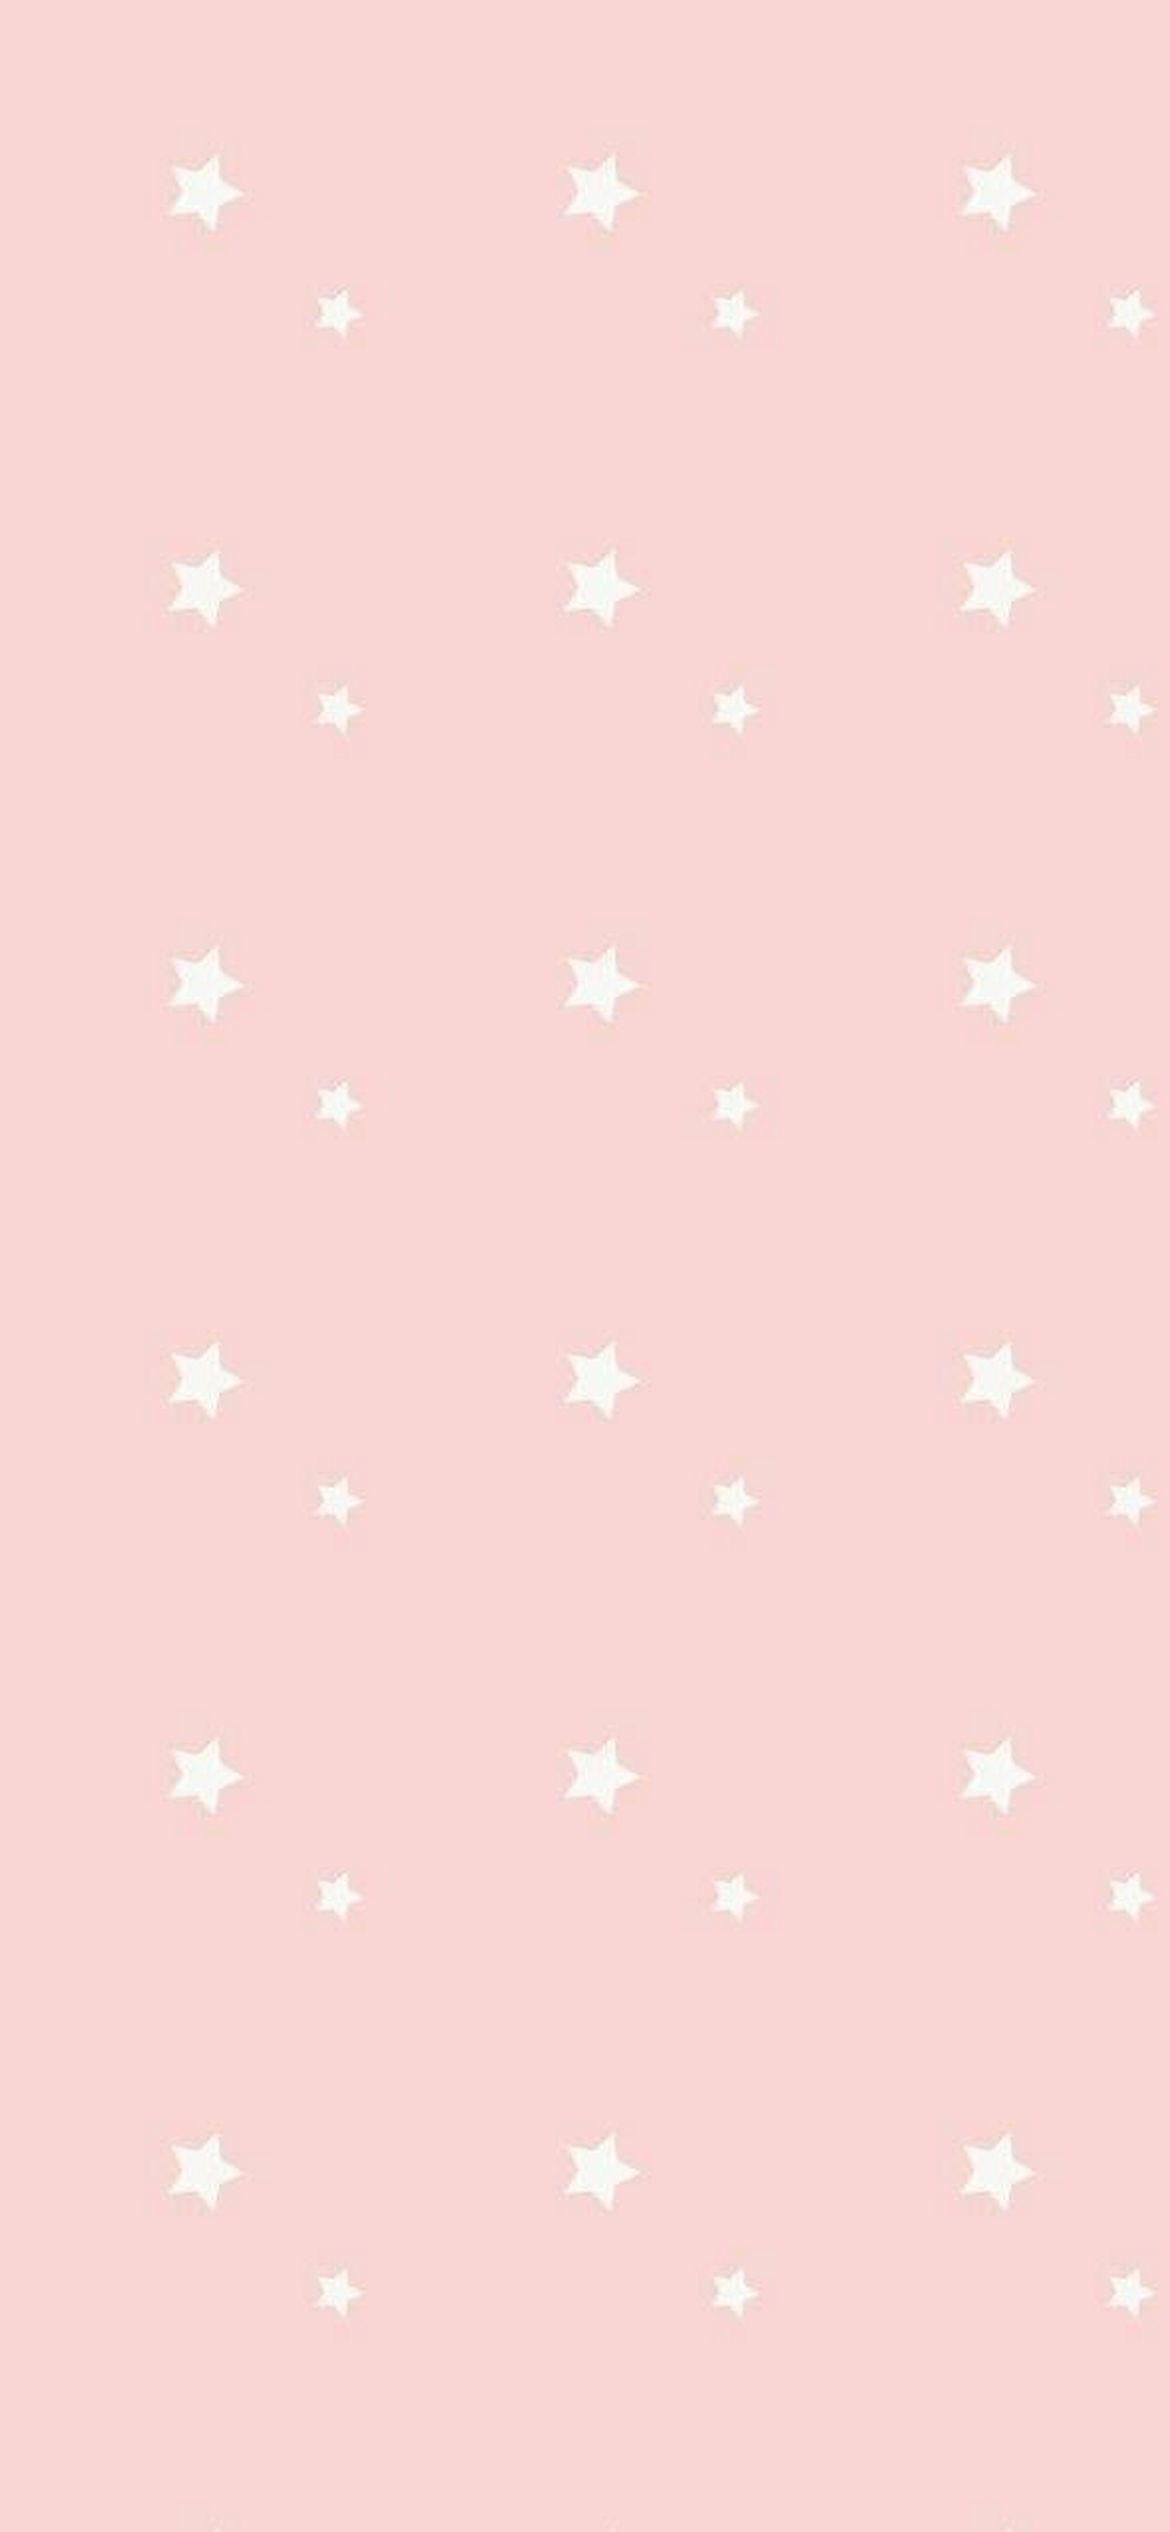 seamless pattern with cherry and stars on pink background 90s aesthetic  textile print wrapping paper scrapbooking stationary packaging  wallpaper etc EPS 10 7644864 Vector Art at Vecteezy